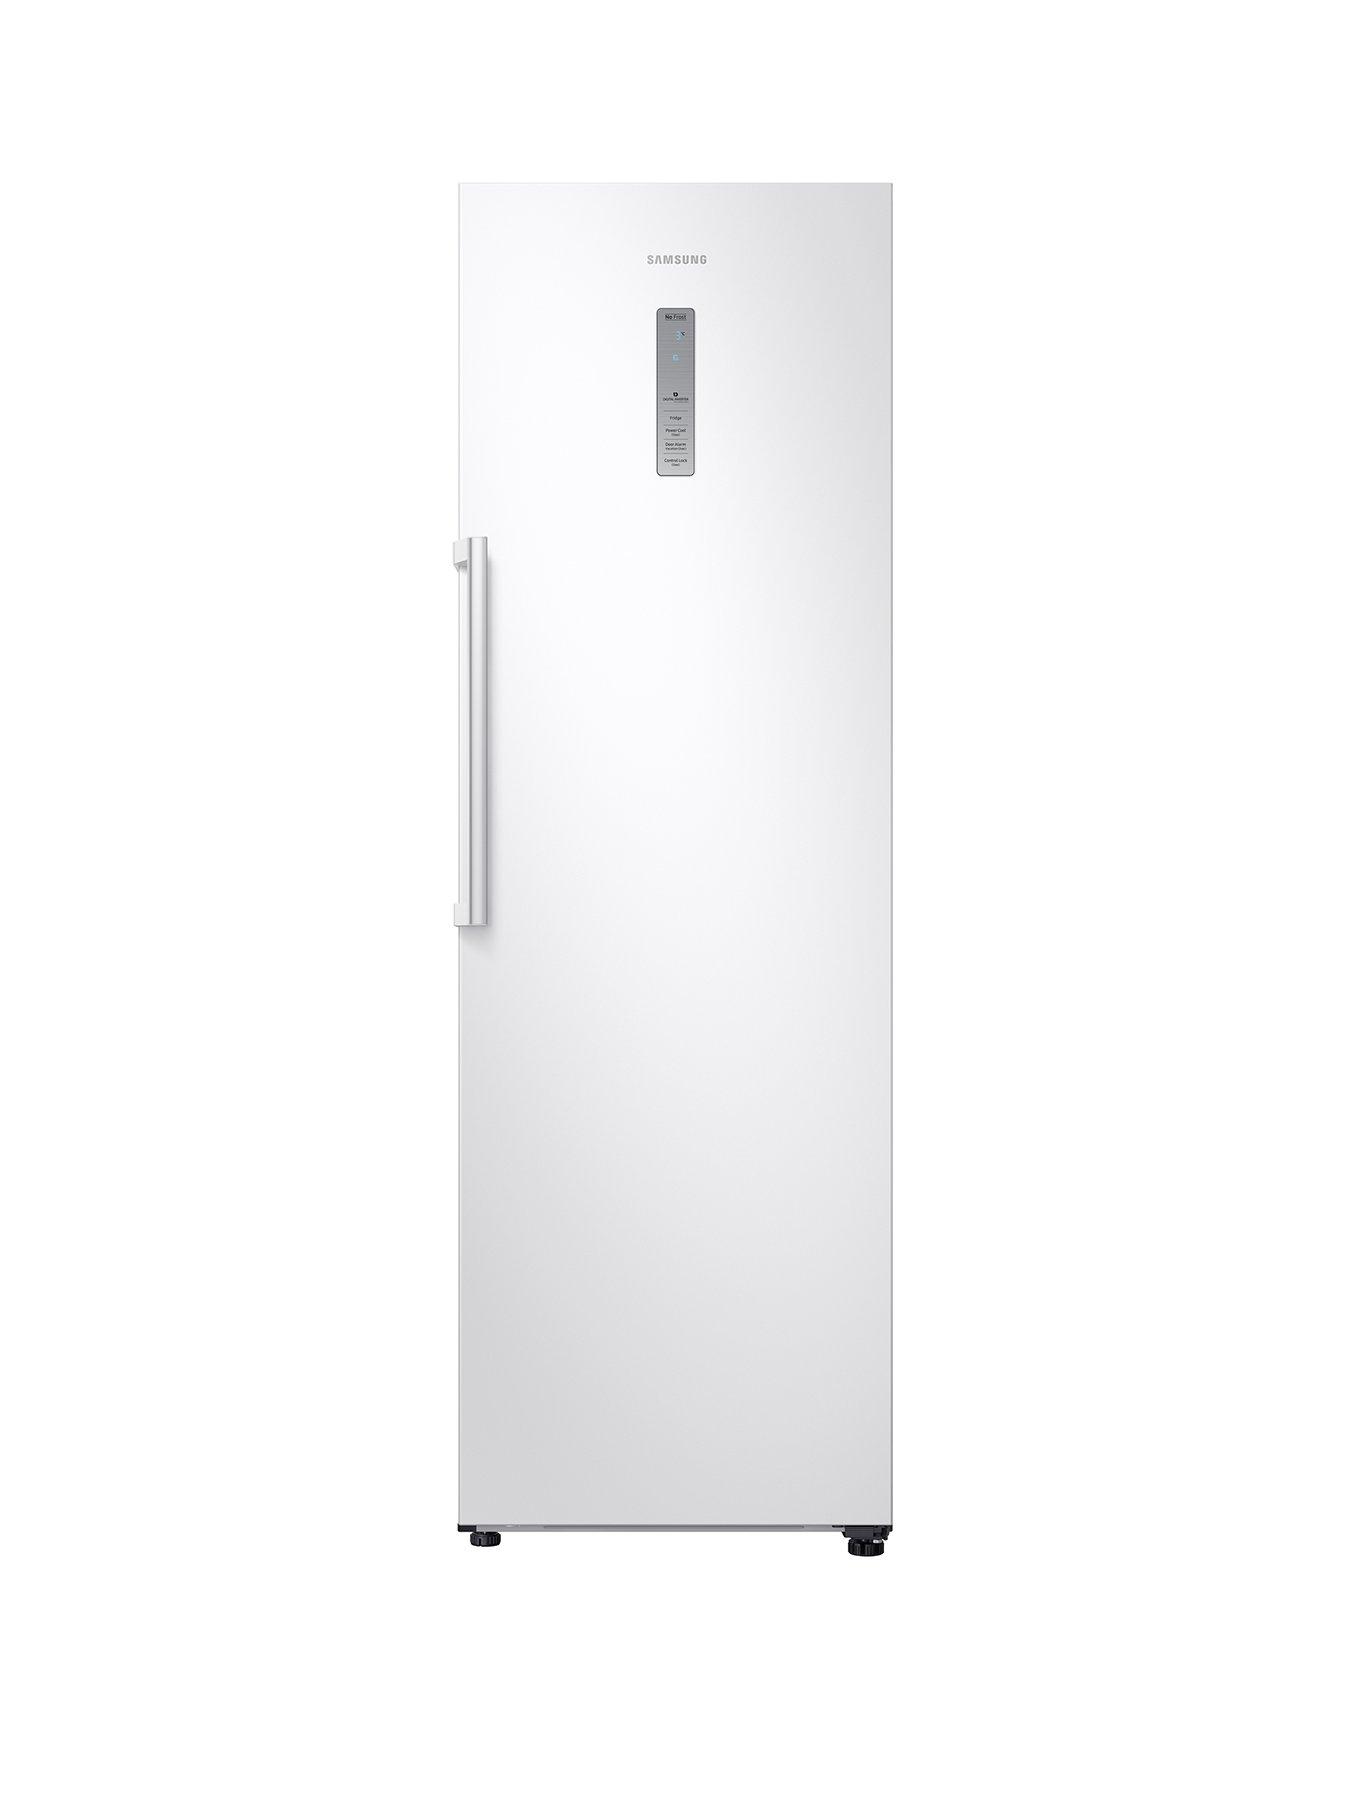 Samsung Rr39M7140Ww/Eu Frost Free Fridge With All-Around Cooling System – White